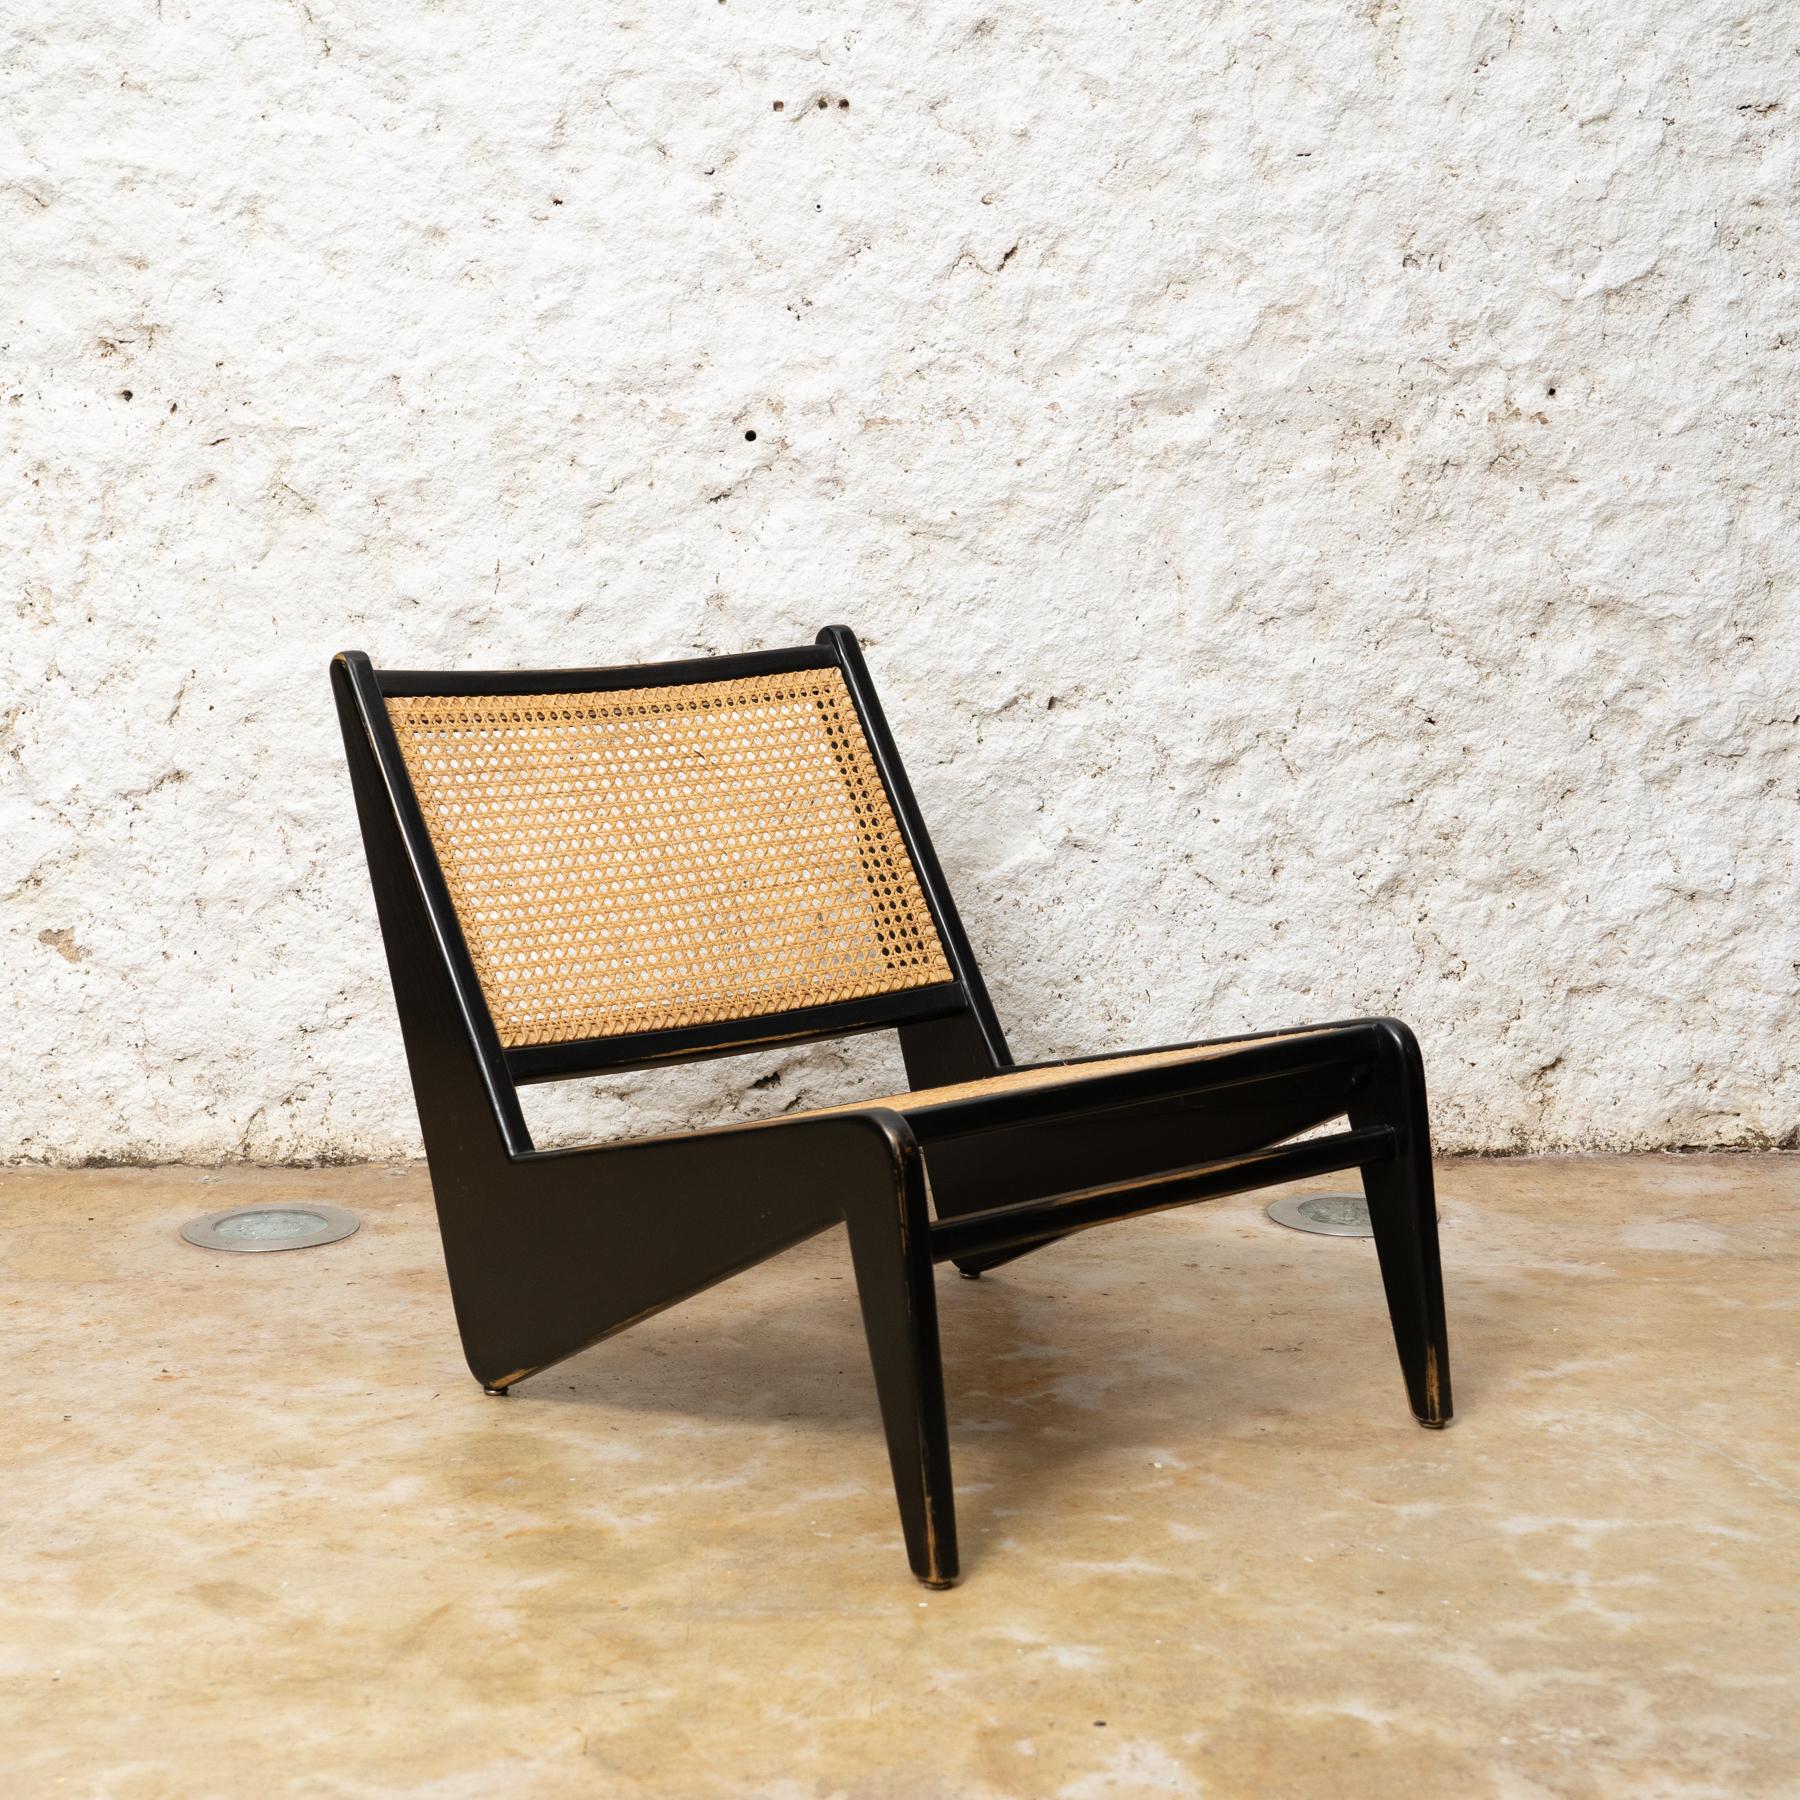 Introducing the Black Wood Chair, a homage to the iconic 